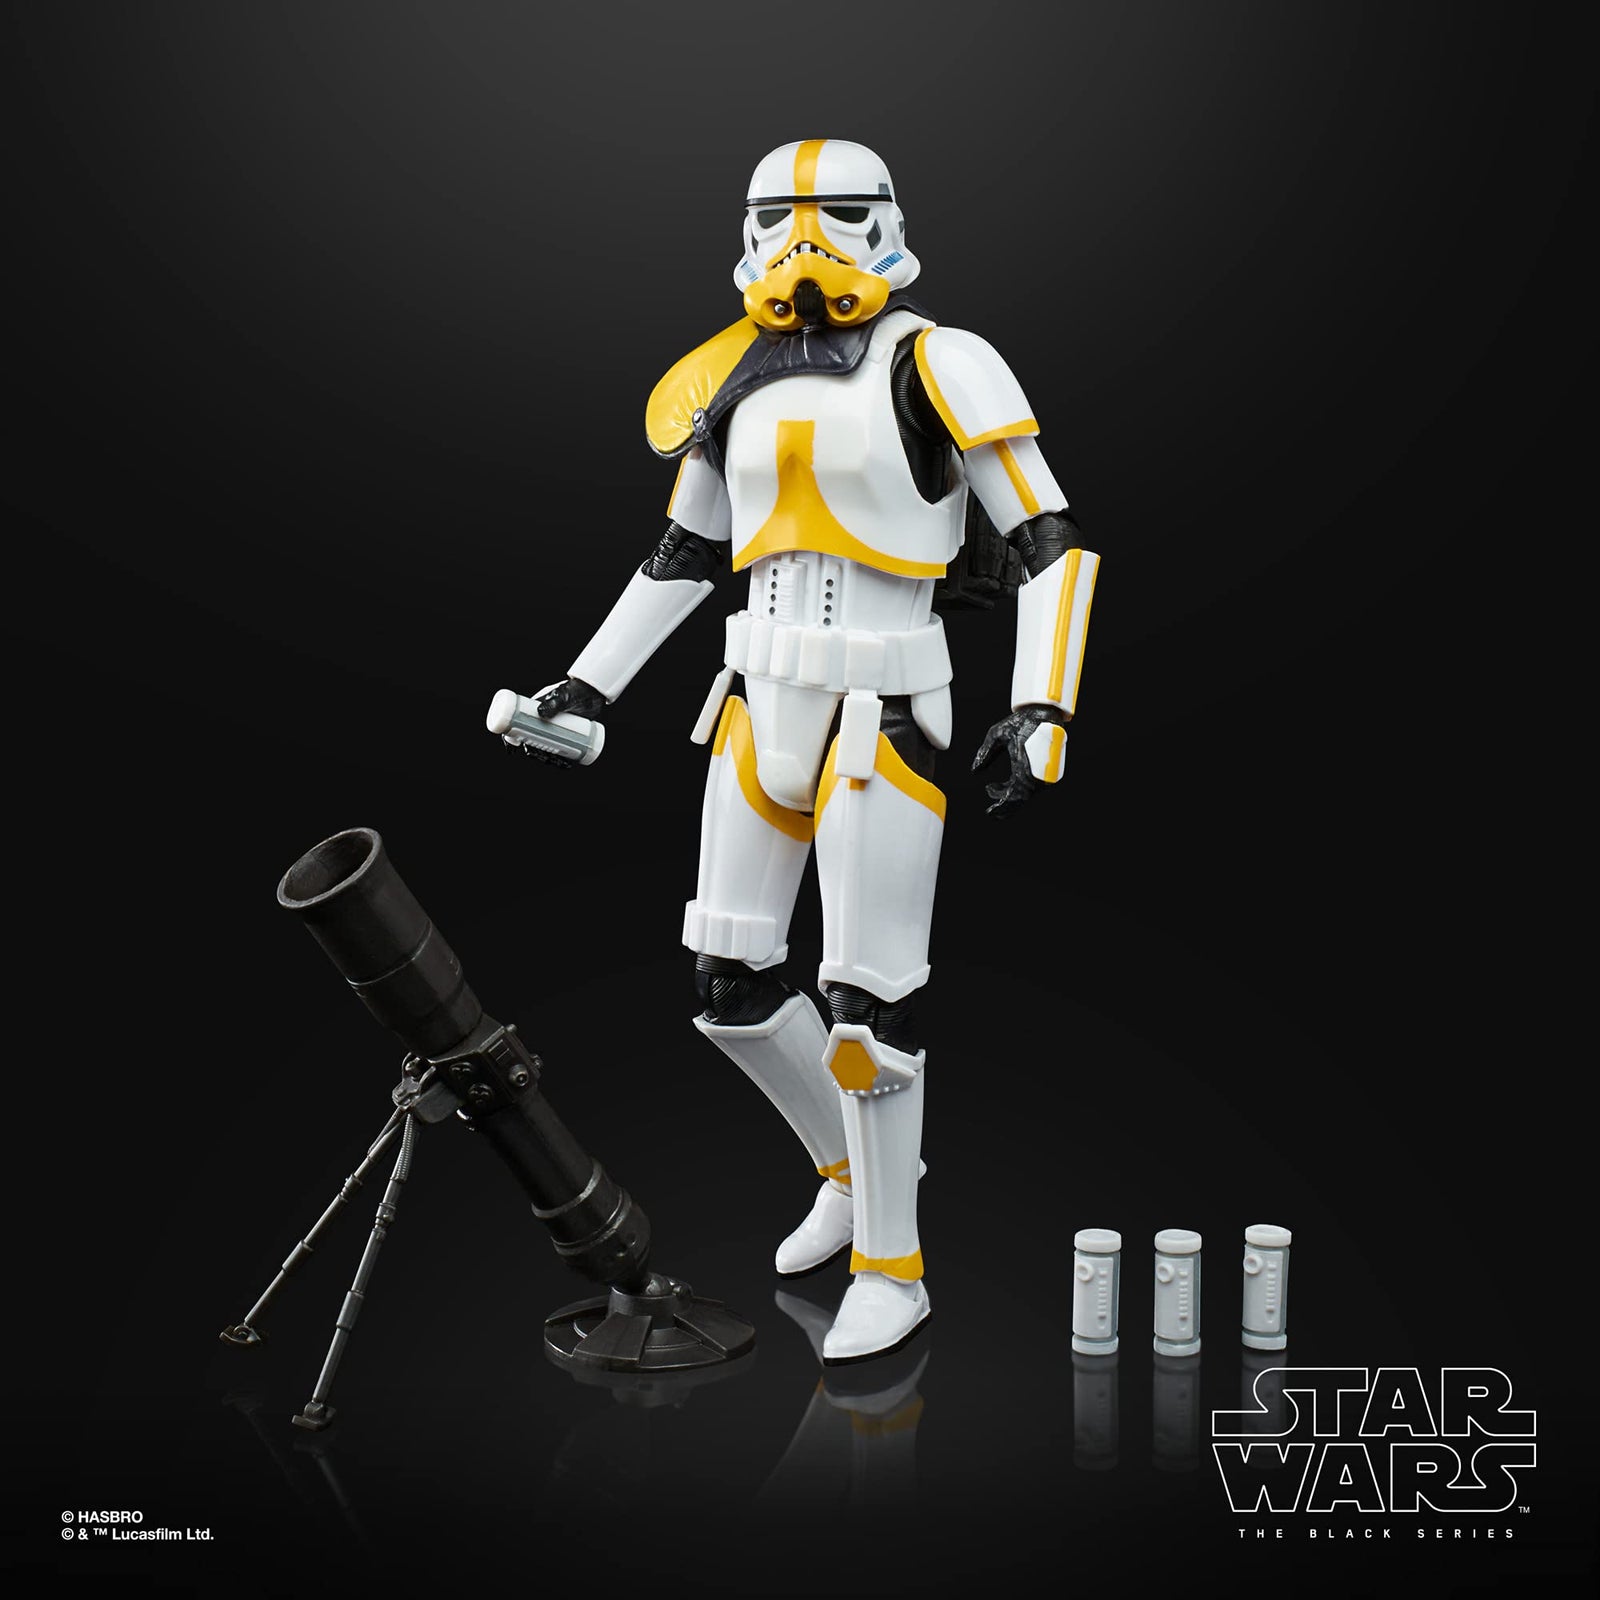 Star Wars The Black Series Artillery Stormtrooper Toy 6-Inch-Scale The Mandalorian Collectible Figure, Toys for Kids Ages 4 and Up (Amazon Exclusive),F2883